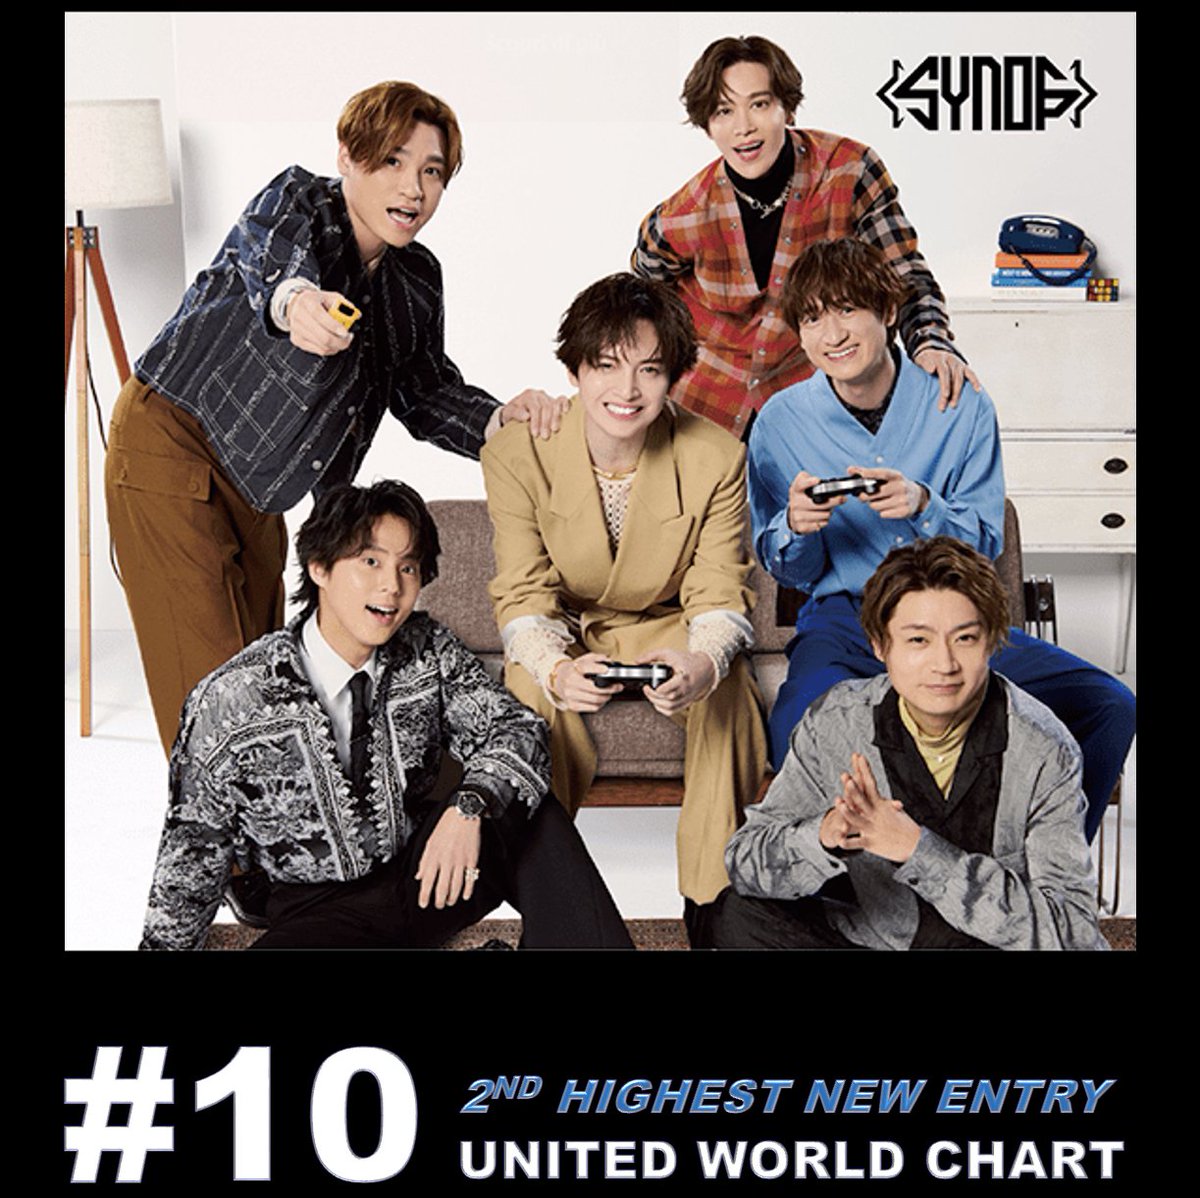 Japanese Boy Band #KisMyFt2 scores the 2nd Highest New Entry on this week's United World Chart, landing at #10 with their new album 'Synopsis' after debuting at #1 on the Oricon Album Chart in Japan with 125,971 sales units! 💪🇯🇵🥈🔝🆕💥🔟🌎📈👑❤️‍🔥 🔗x.com/KMF2_0810MENT/…